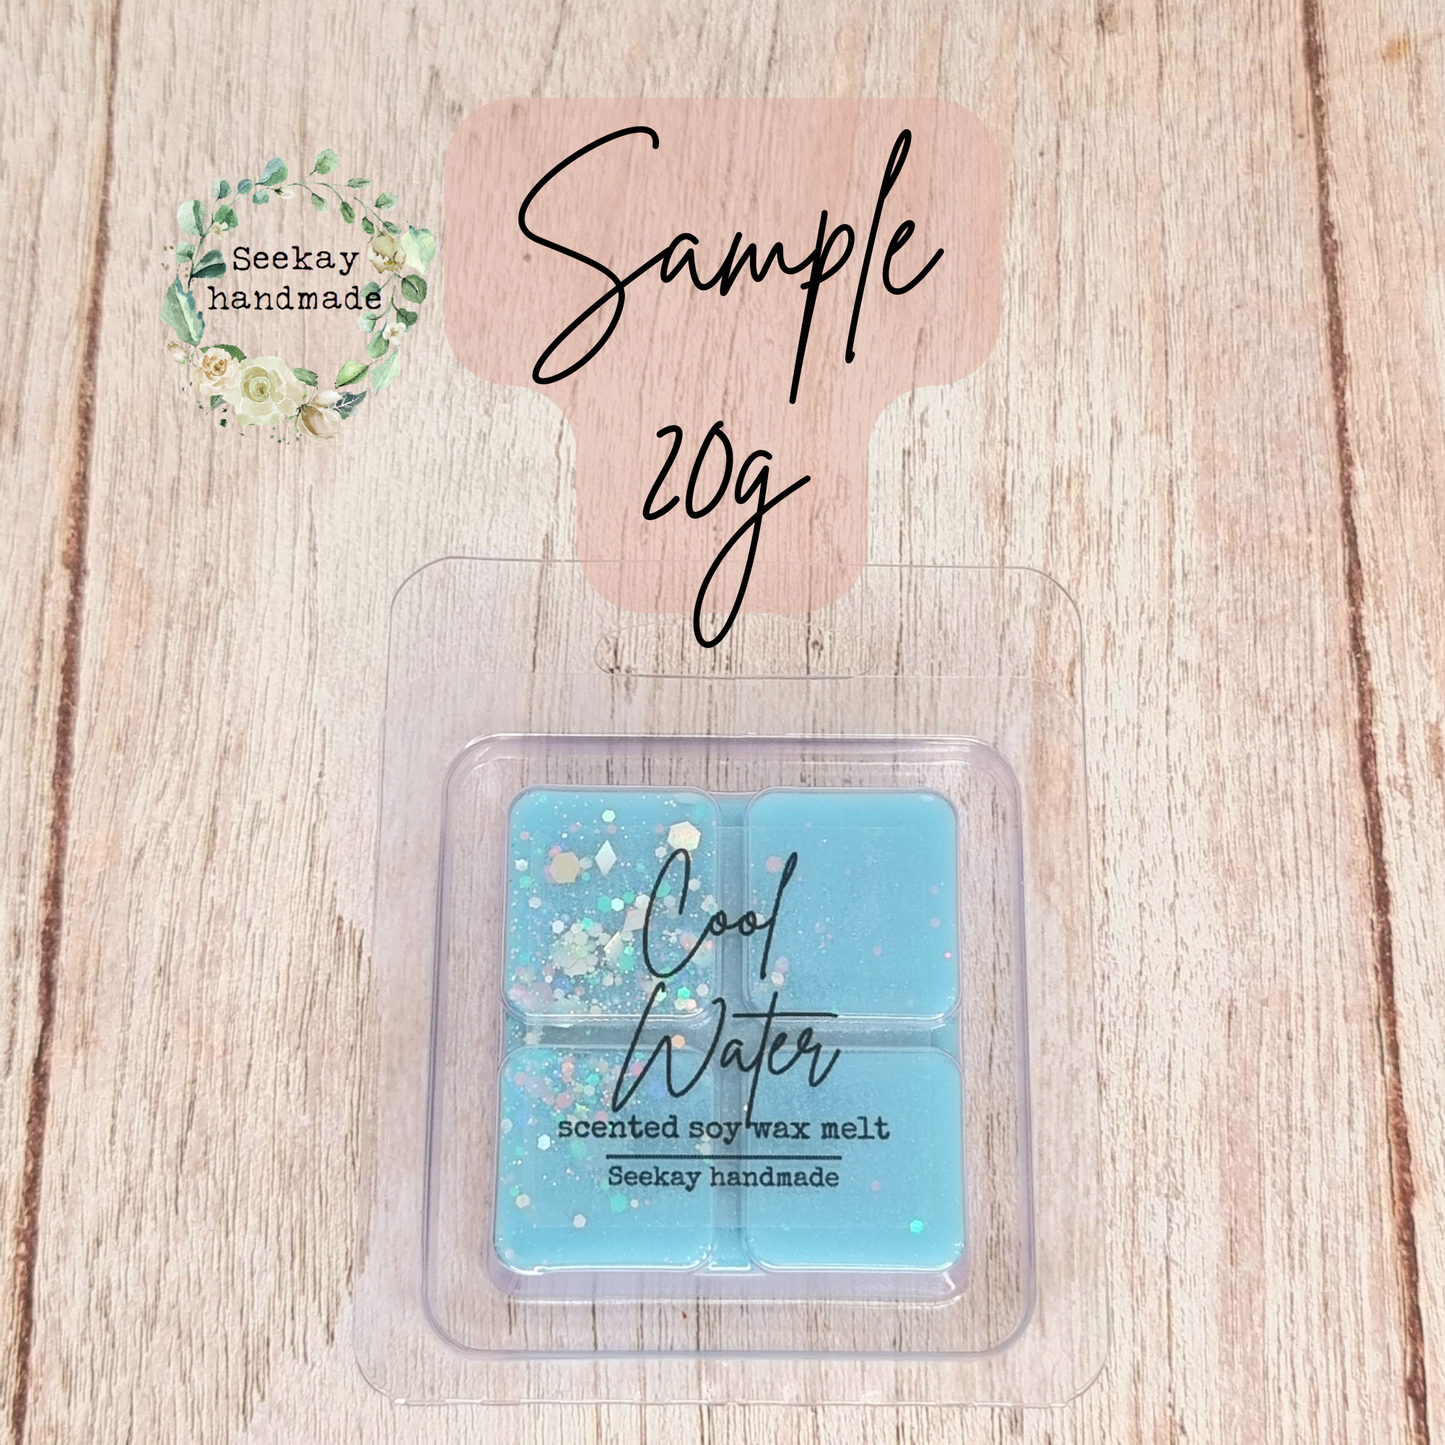 Cool Water inspired soy wax melt